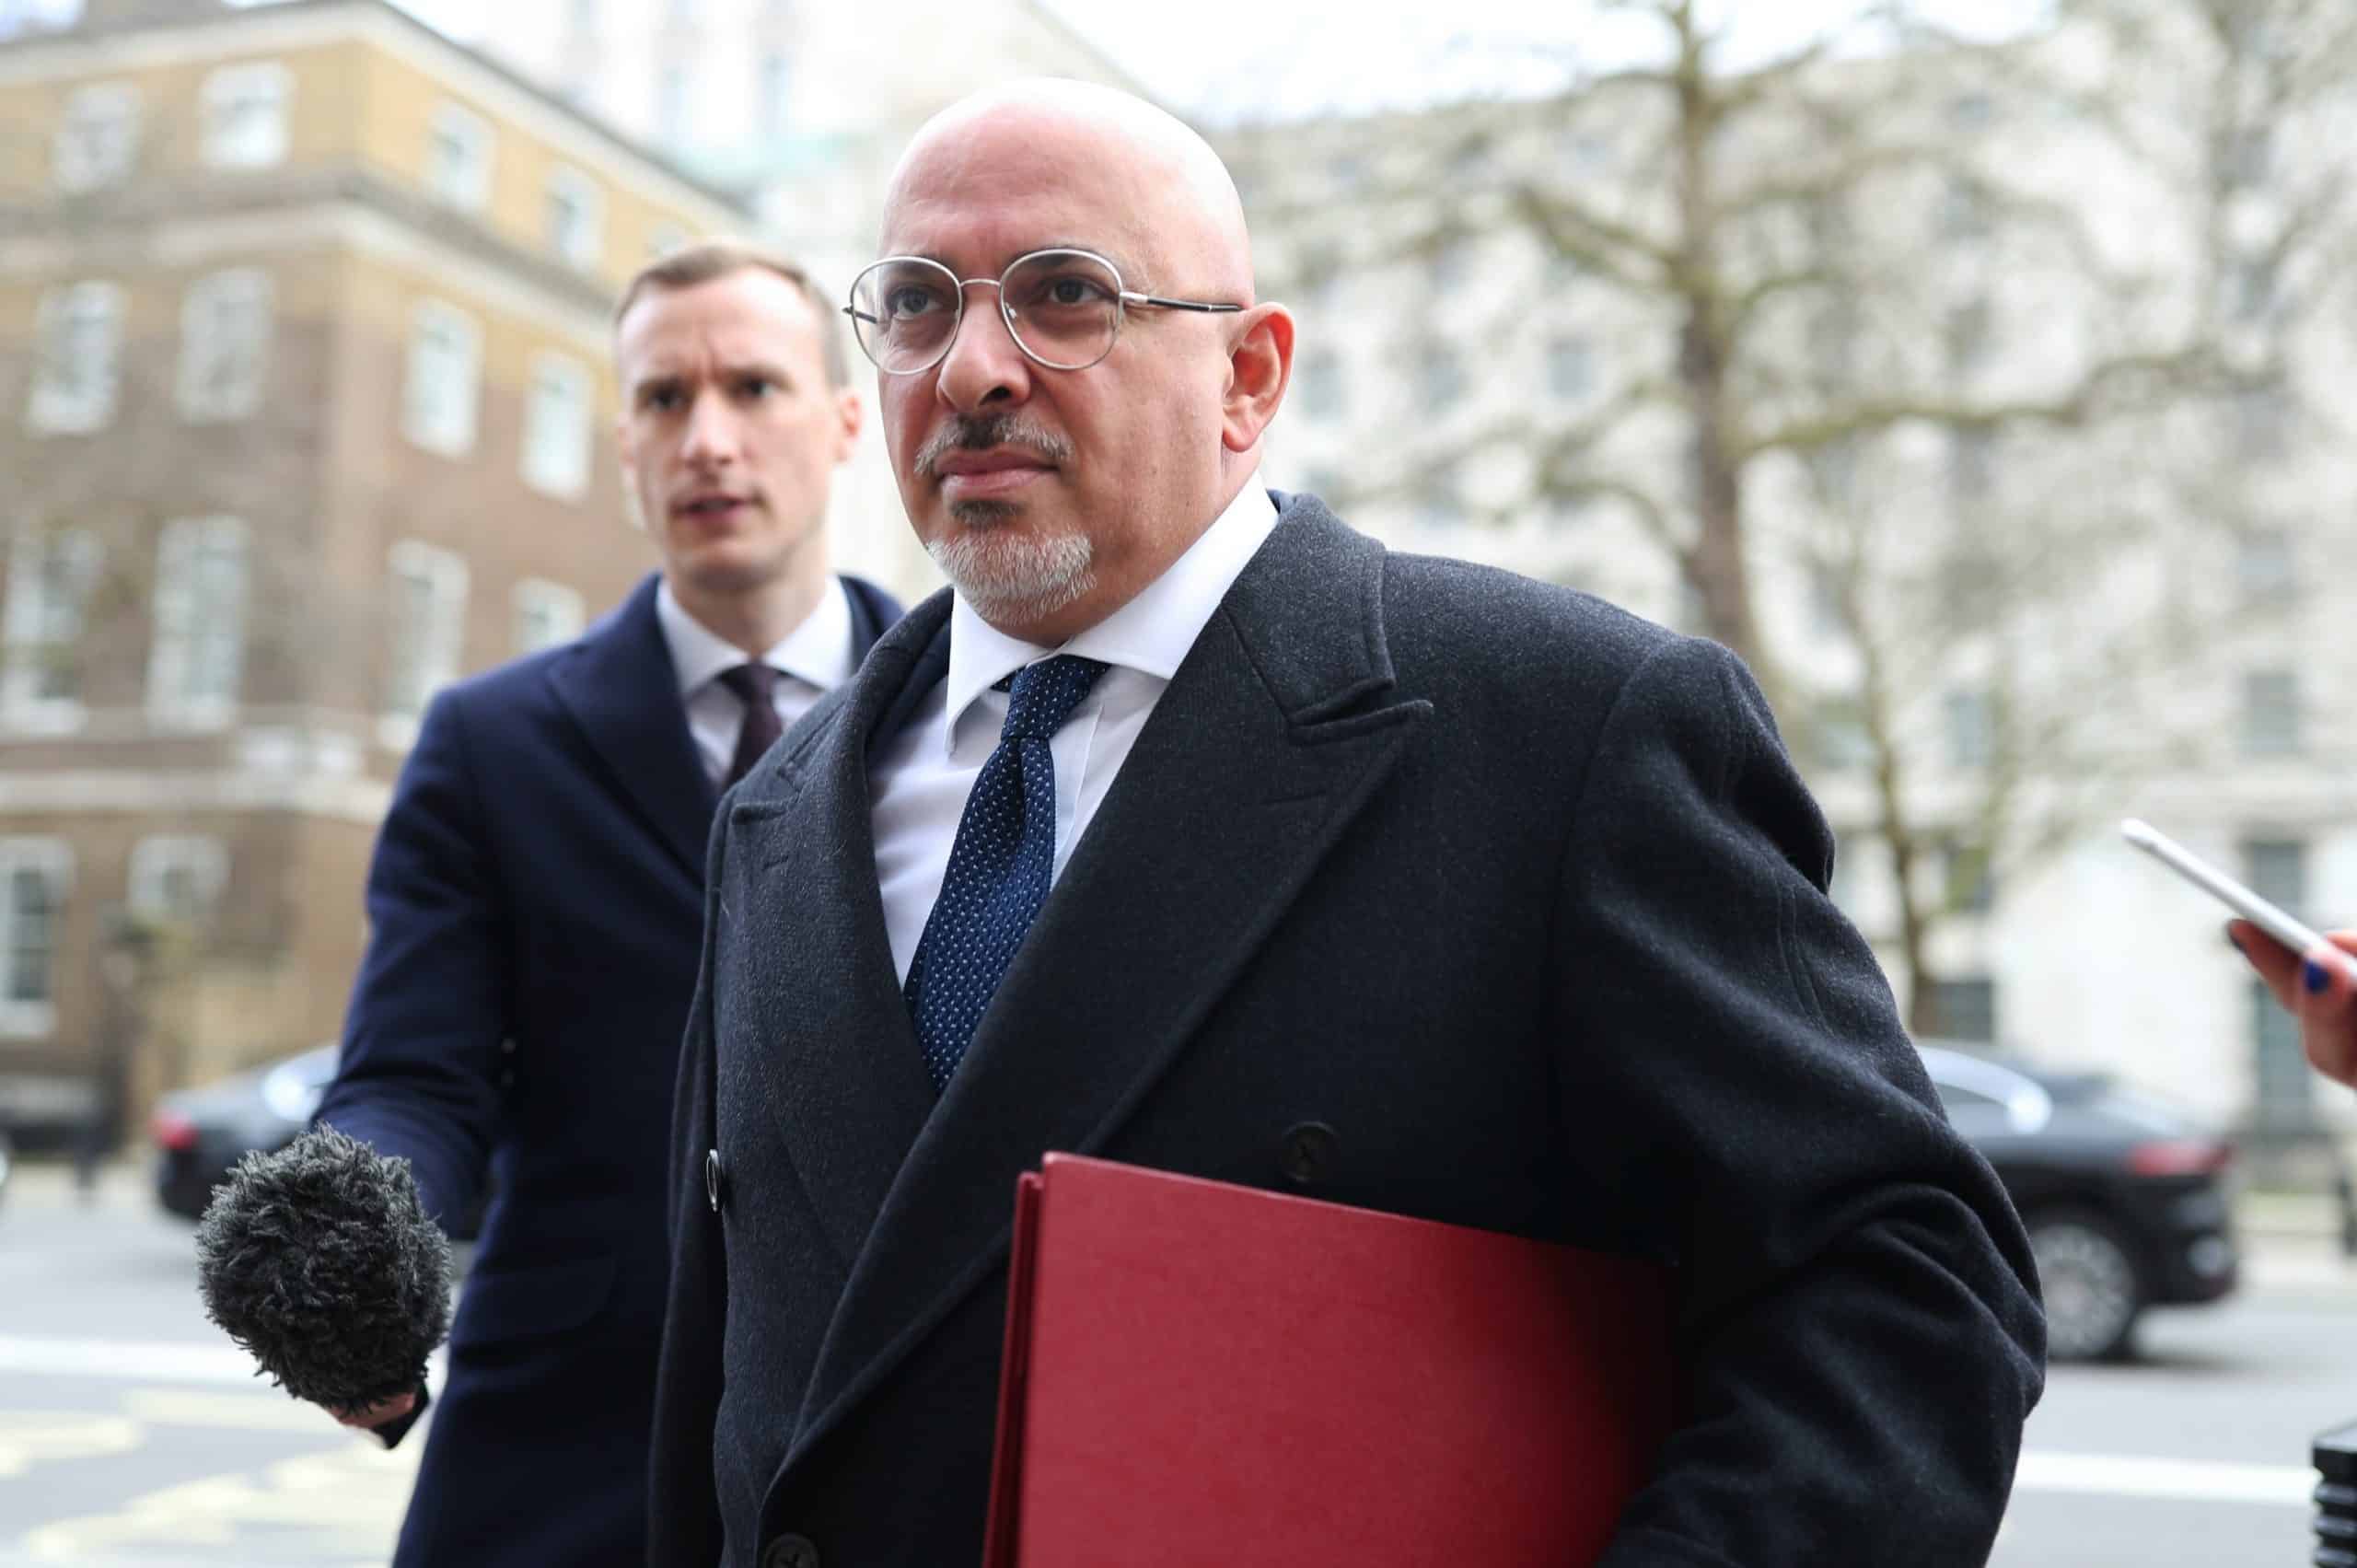 Vaccine minister Zahawi grilled by Piers over ‘pointless’ border tests